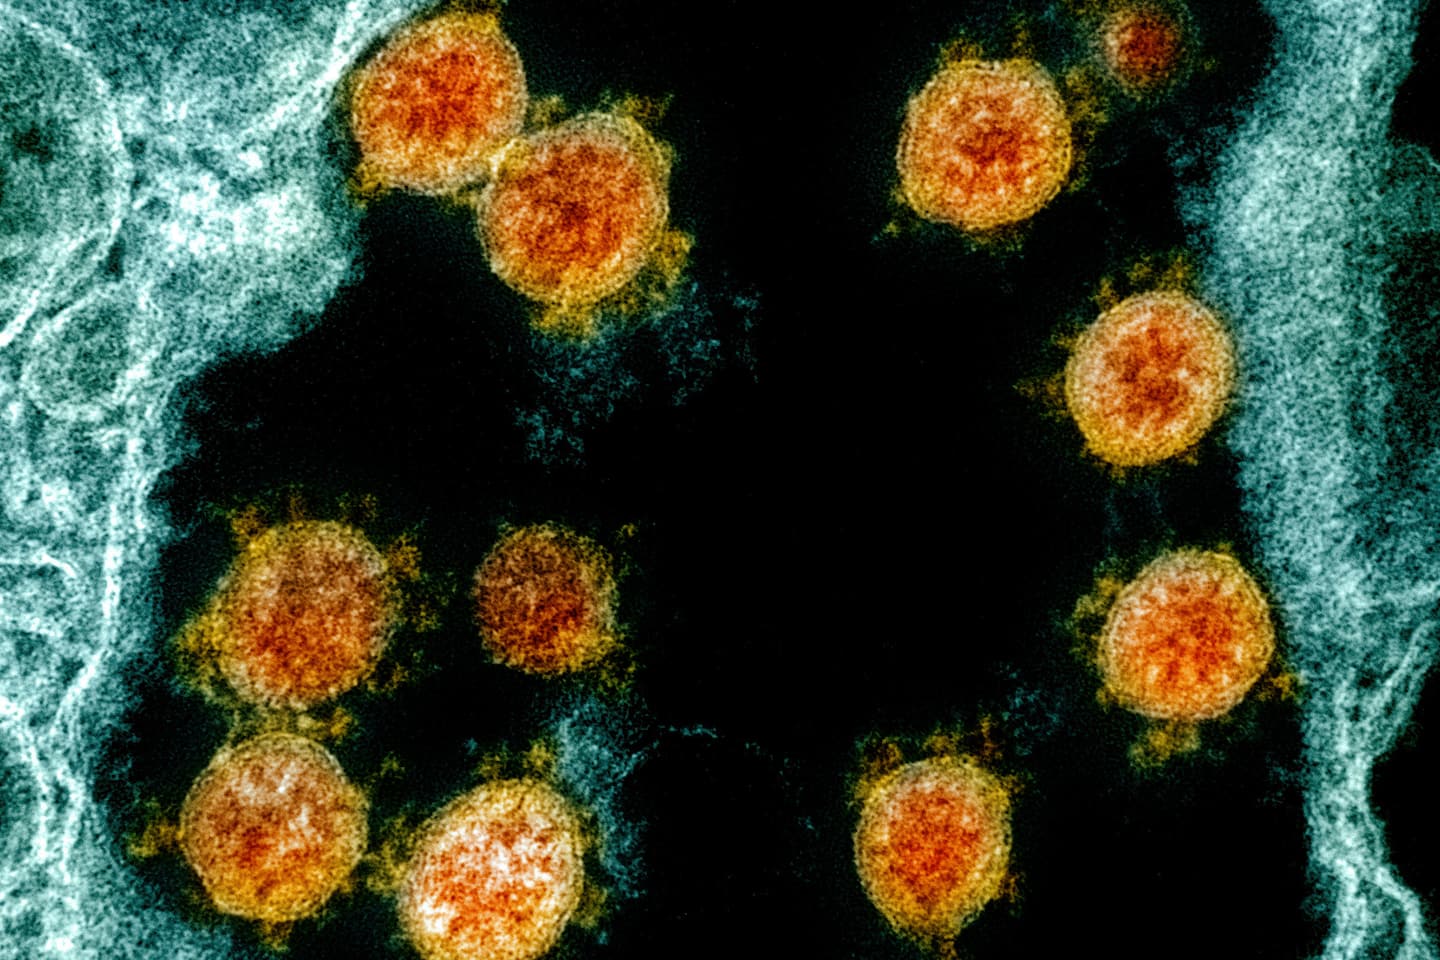 The CDC model found that people without symptoms spread the virus in more than half of cases